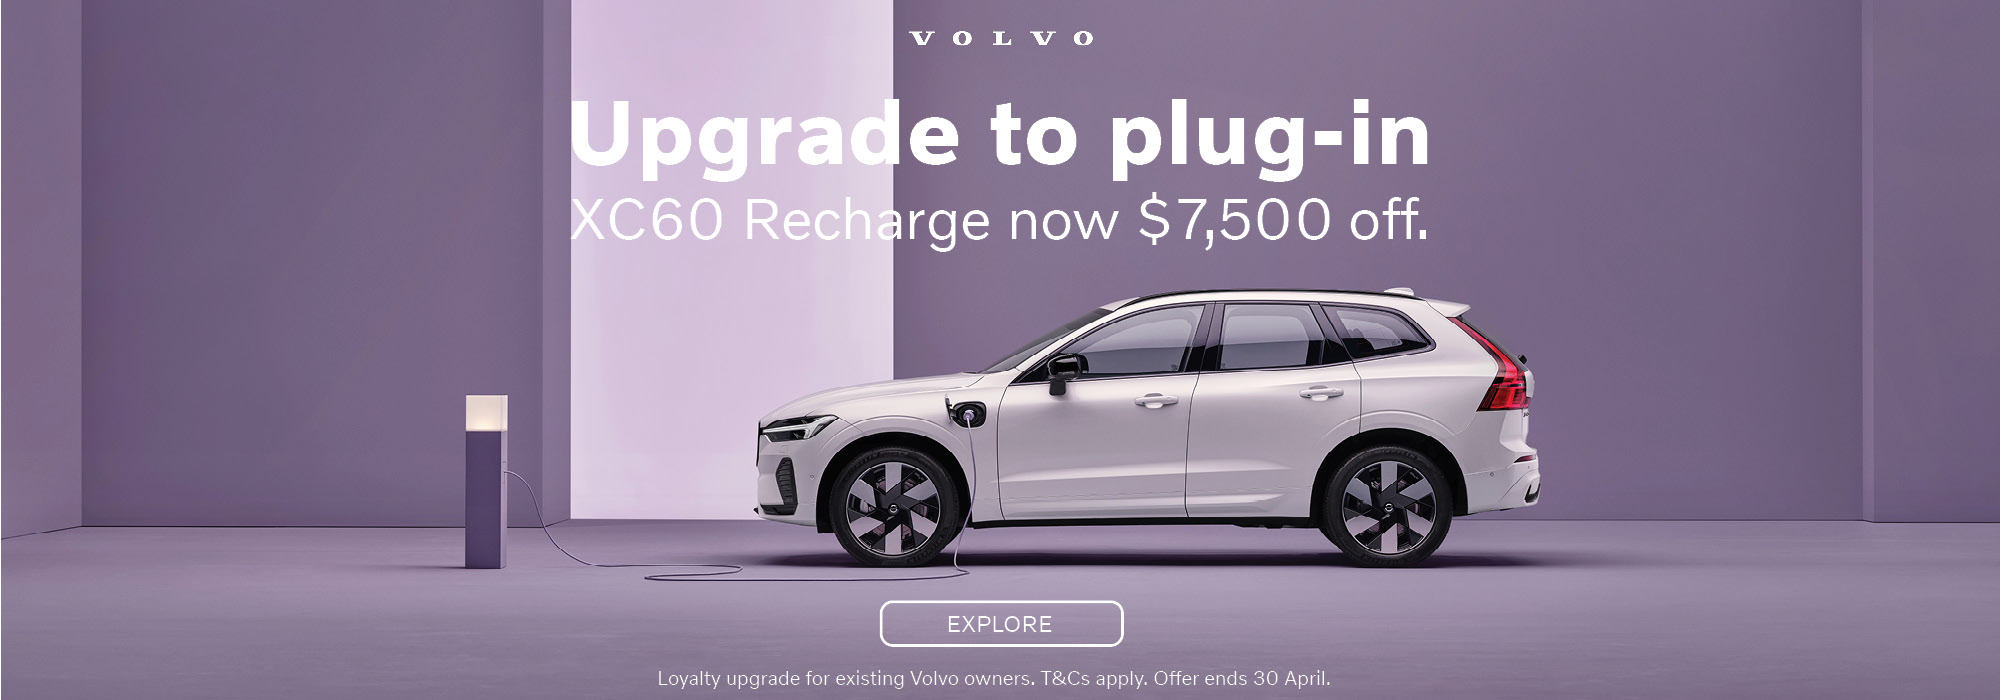 Upgrade to a XC60 Plug-in Hybrid and save $7,500*